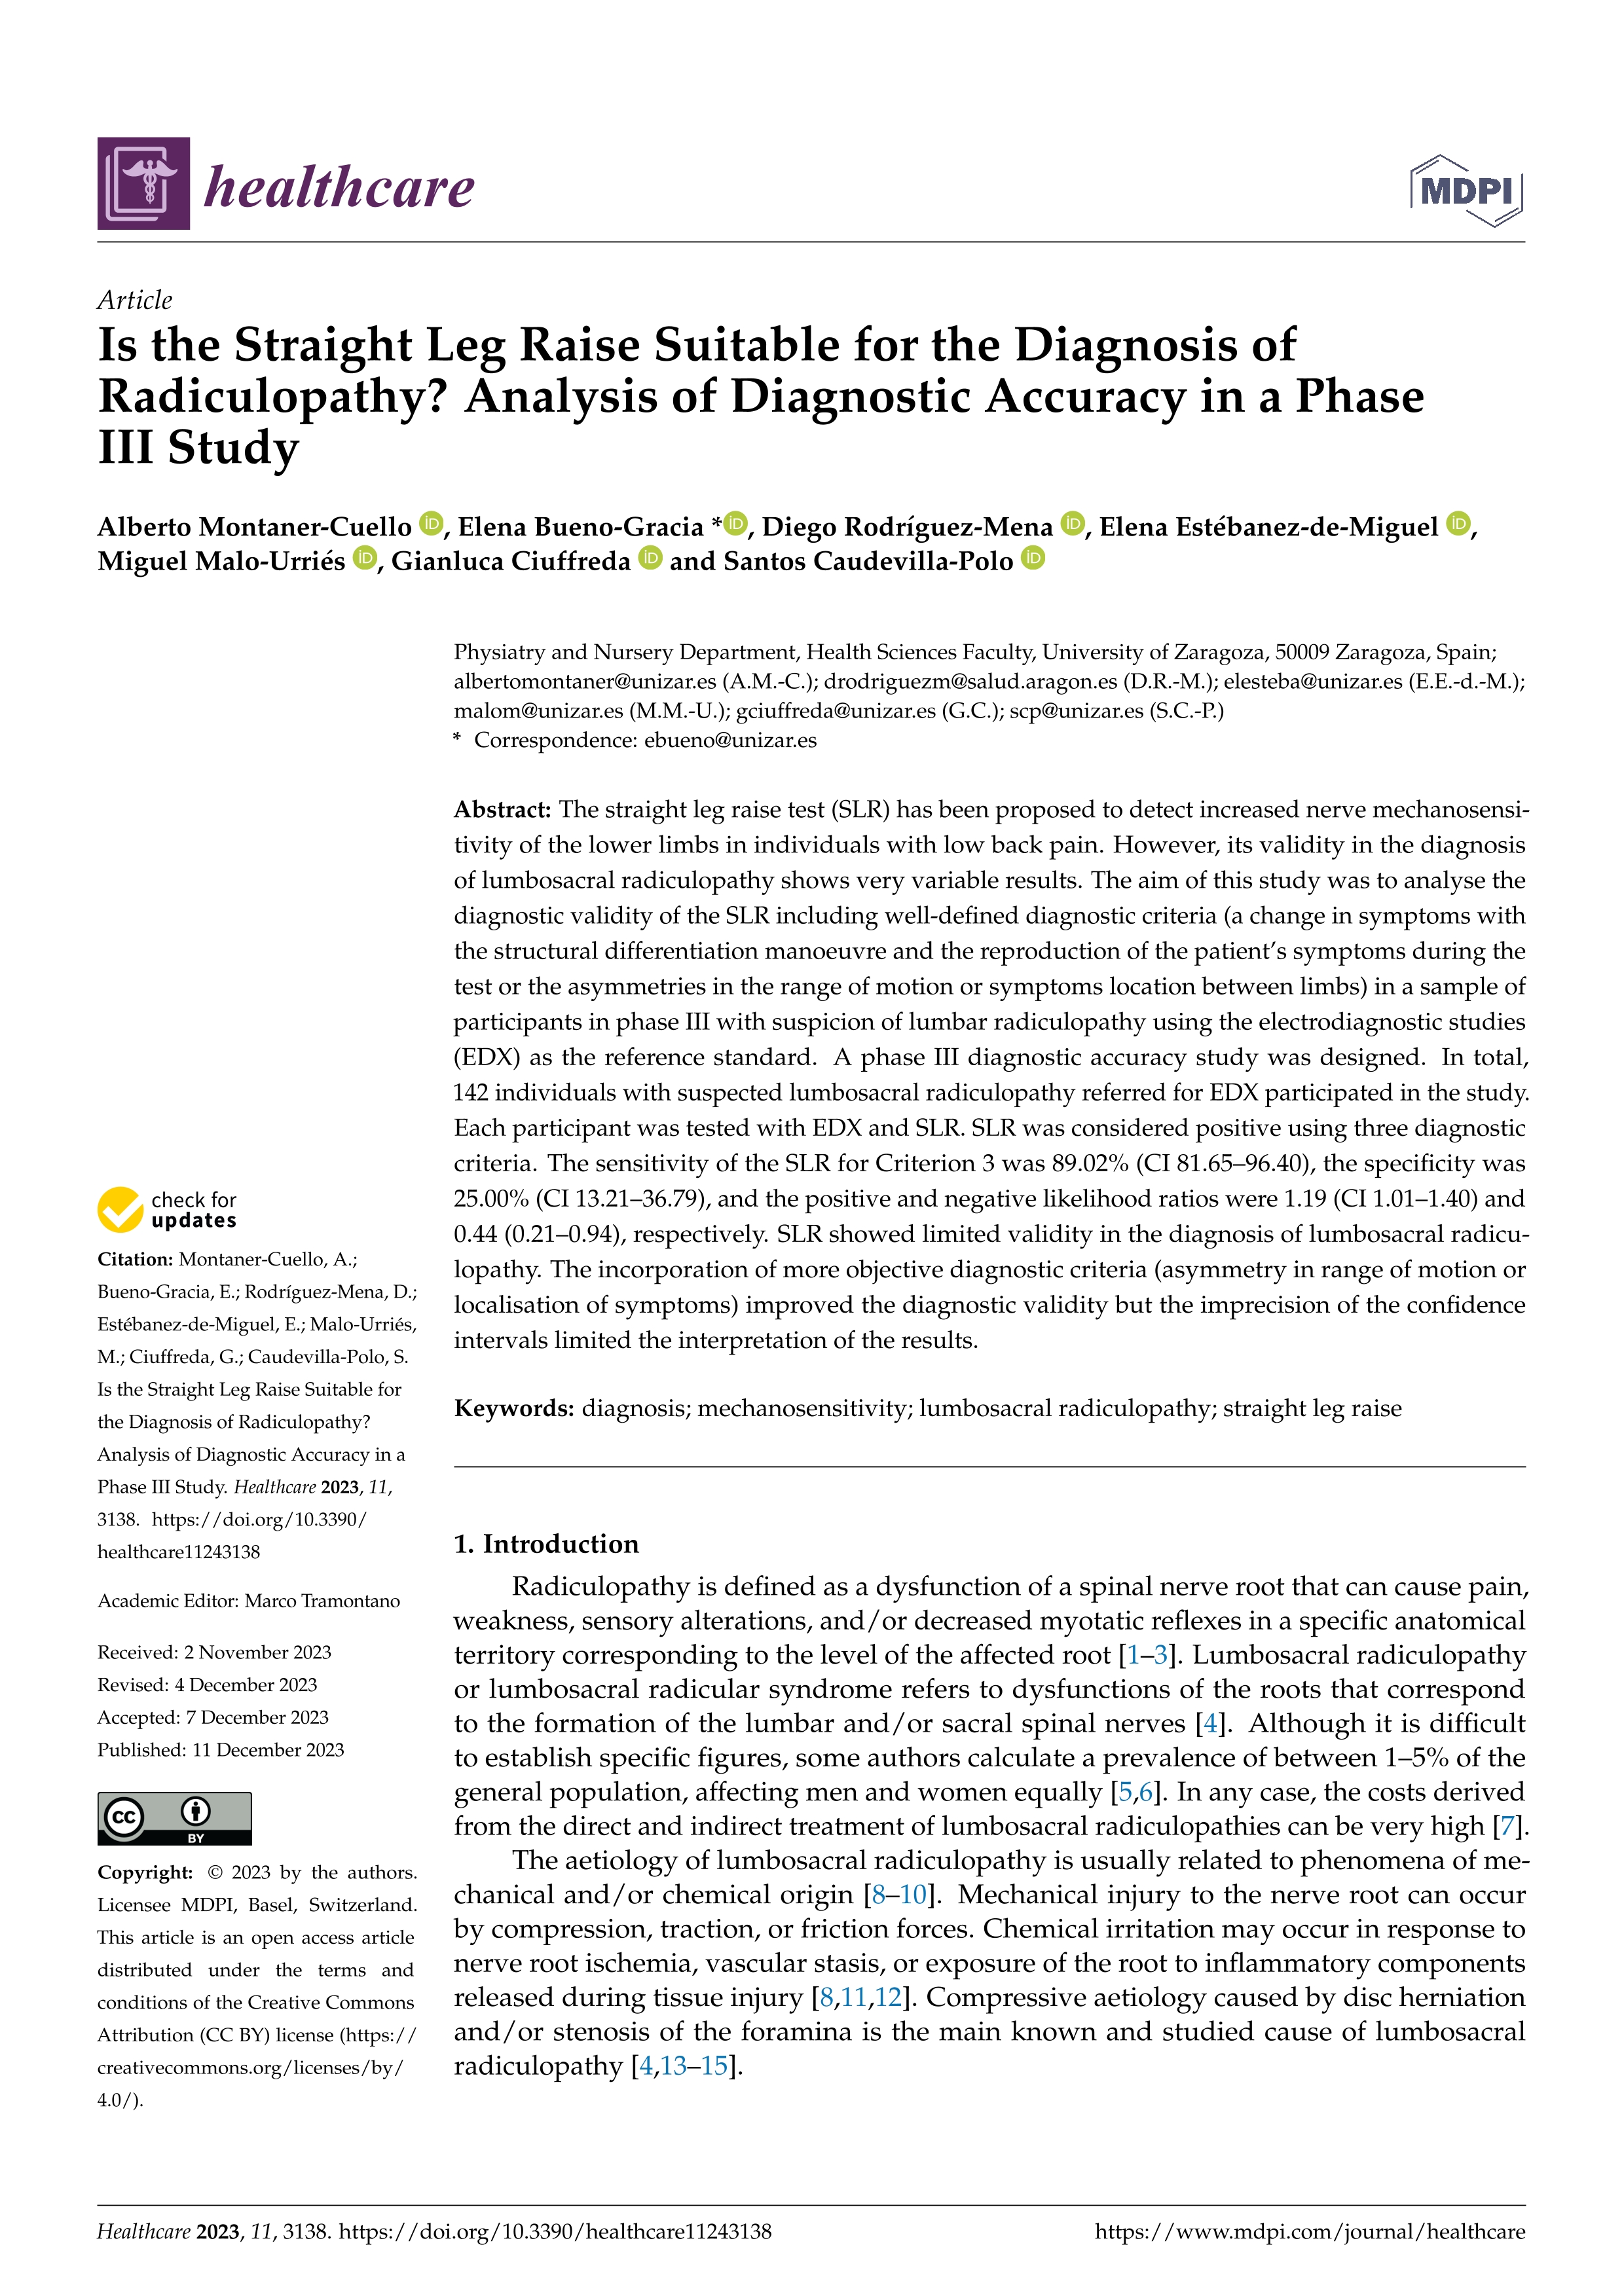 Is the straight leg raise suitable for the diagnosis of radiculopathy? analysis of diagnostic accuracy in a phase iii study